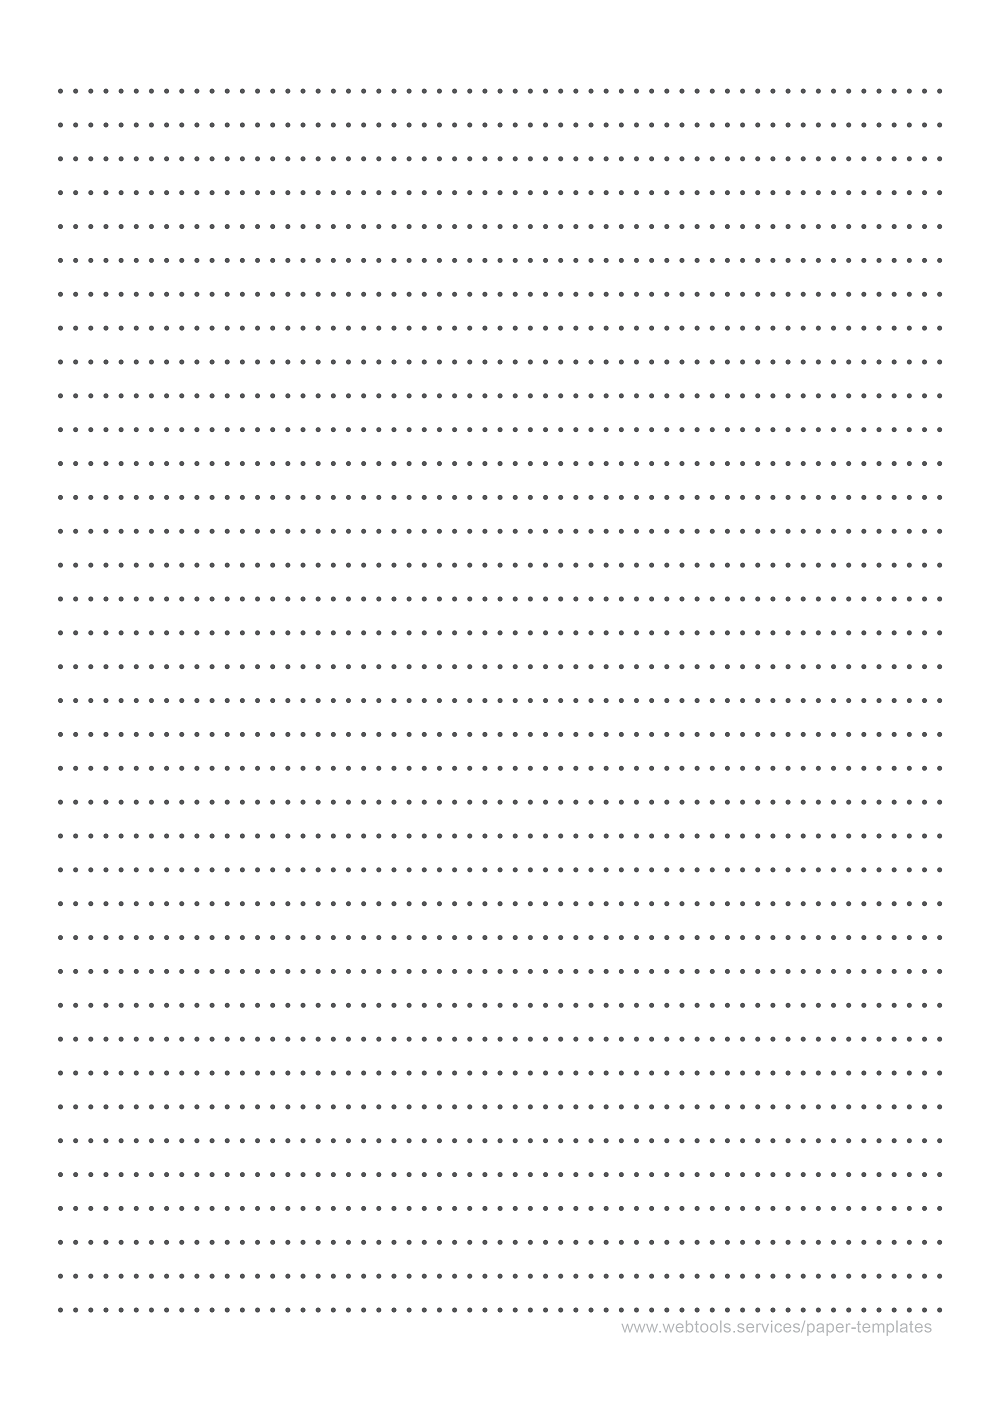 Medium Ruled Paper With Dotted Black Lines